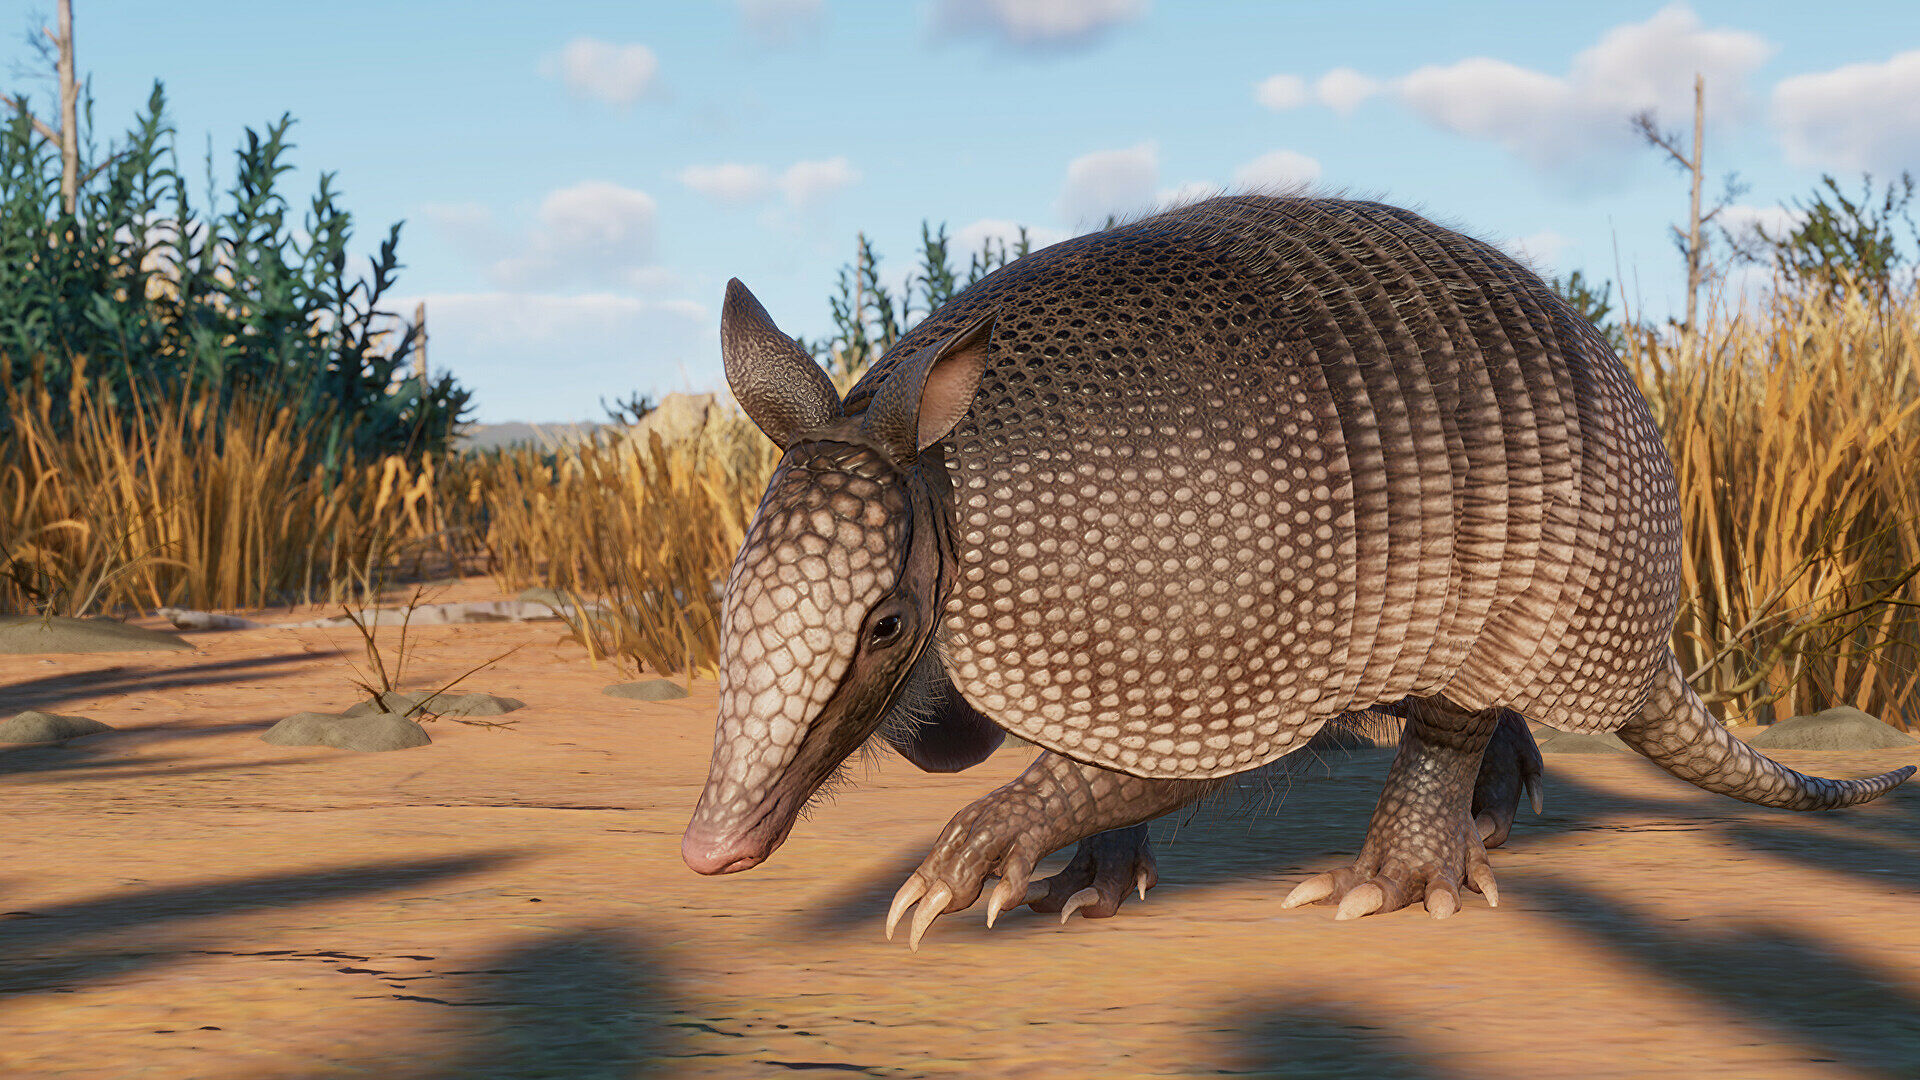 Planet Zoo adds emus, armadillos, and more in new Grasslands expansion